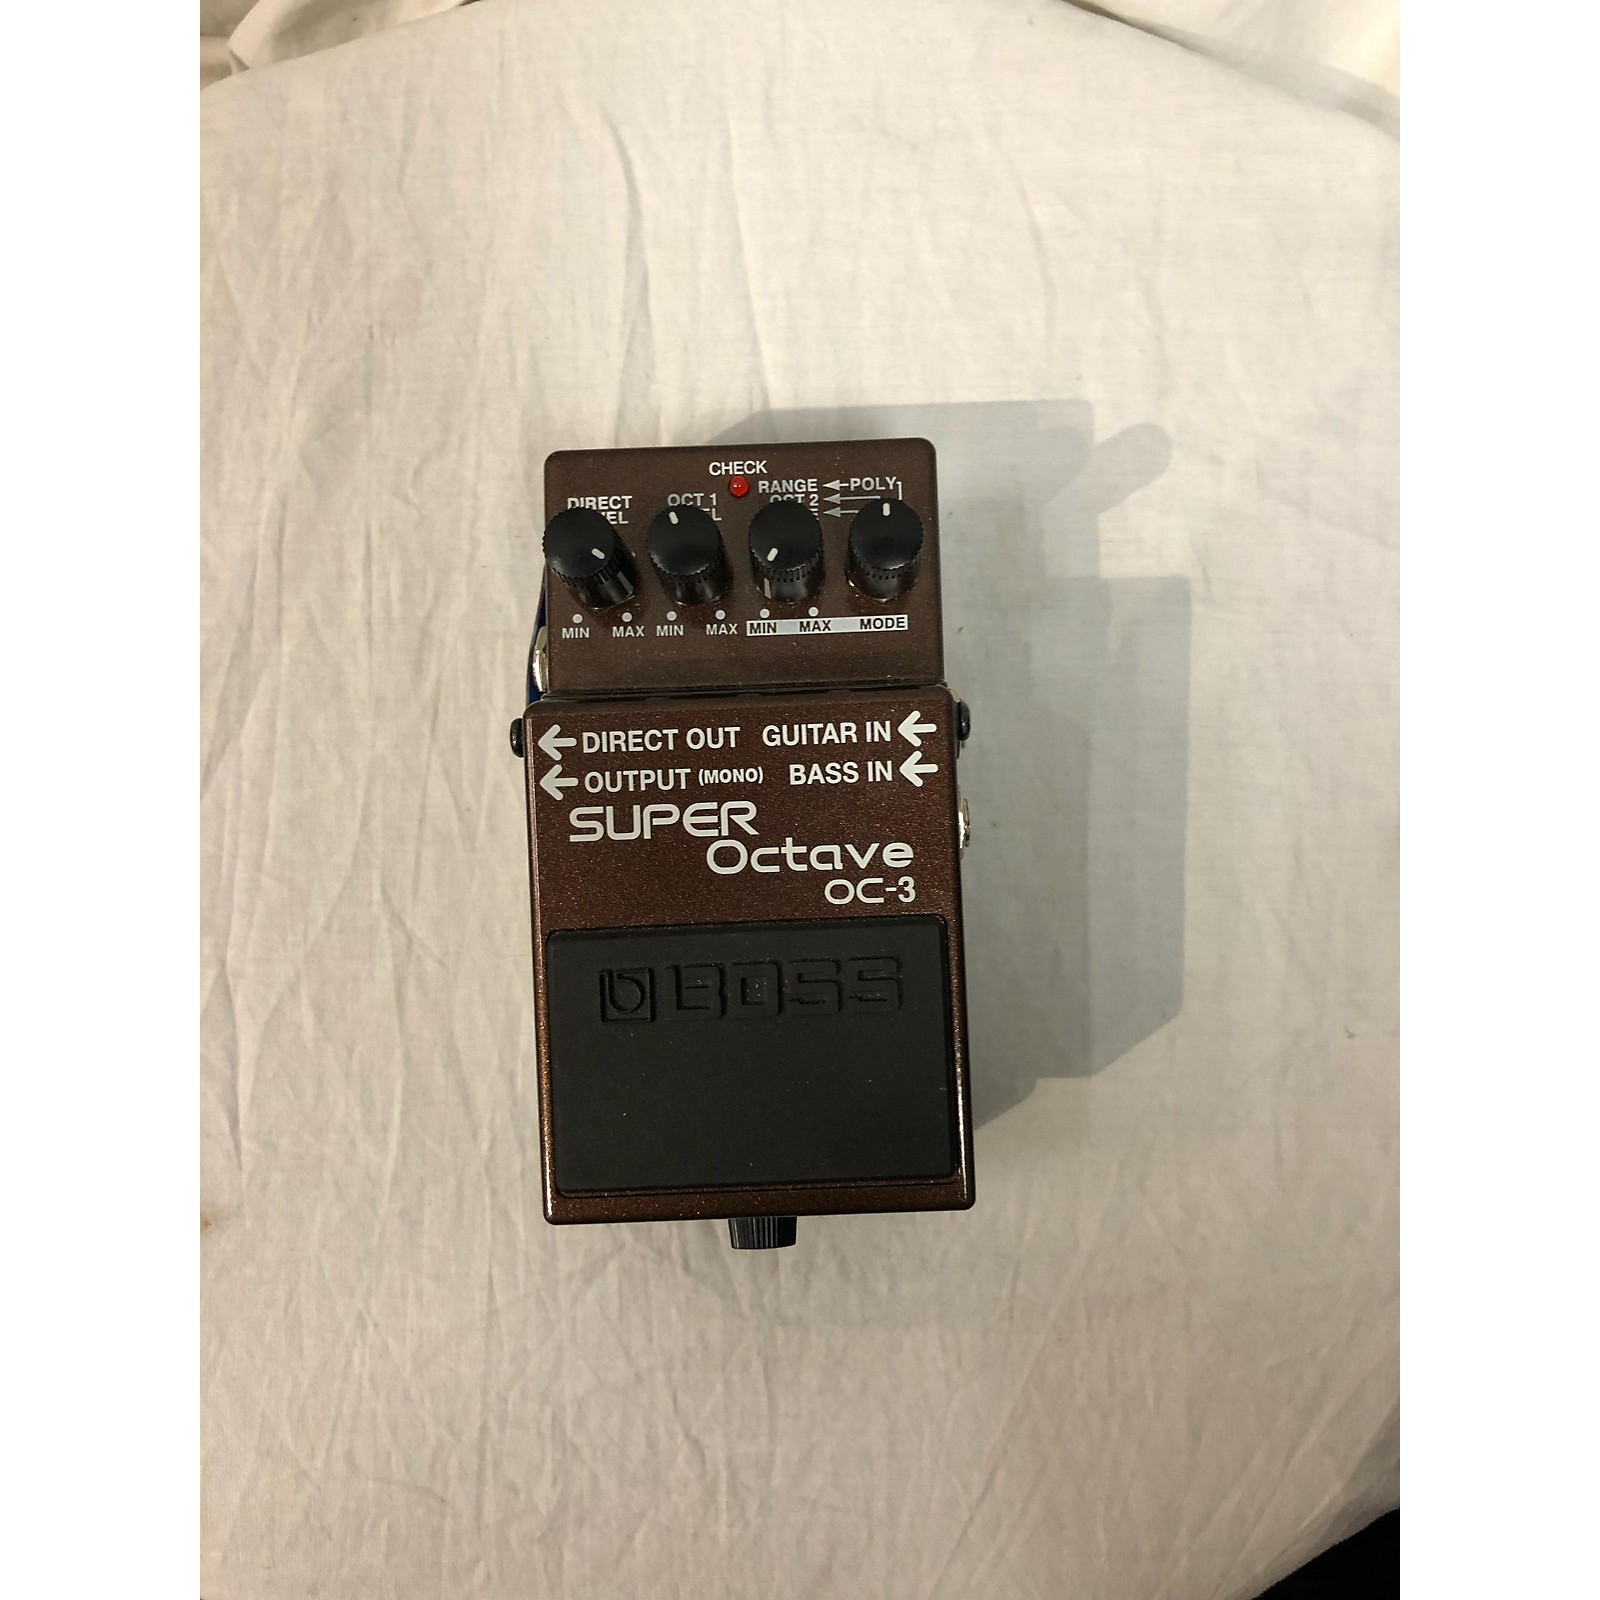 boss octave pedal